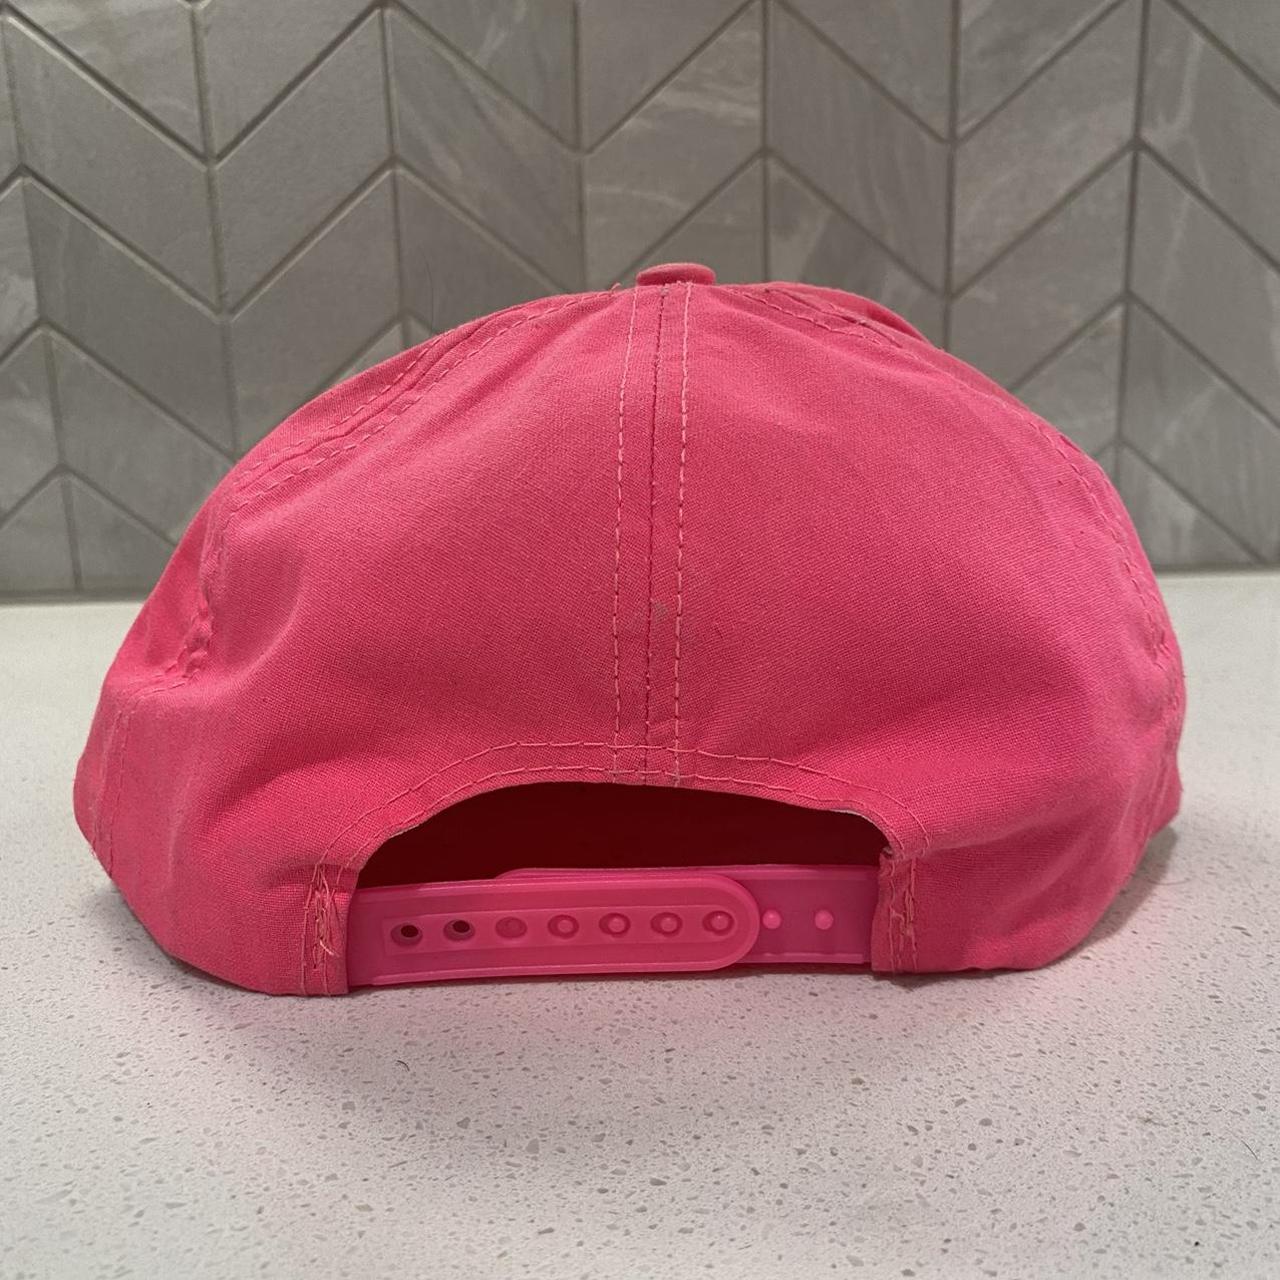 NBA Men's Pink and Red Hat (4)